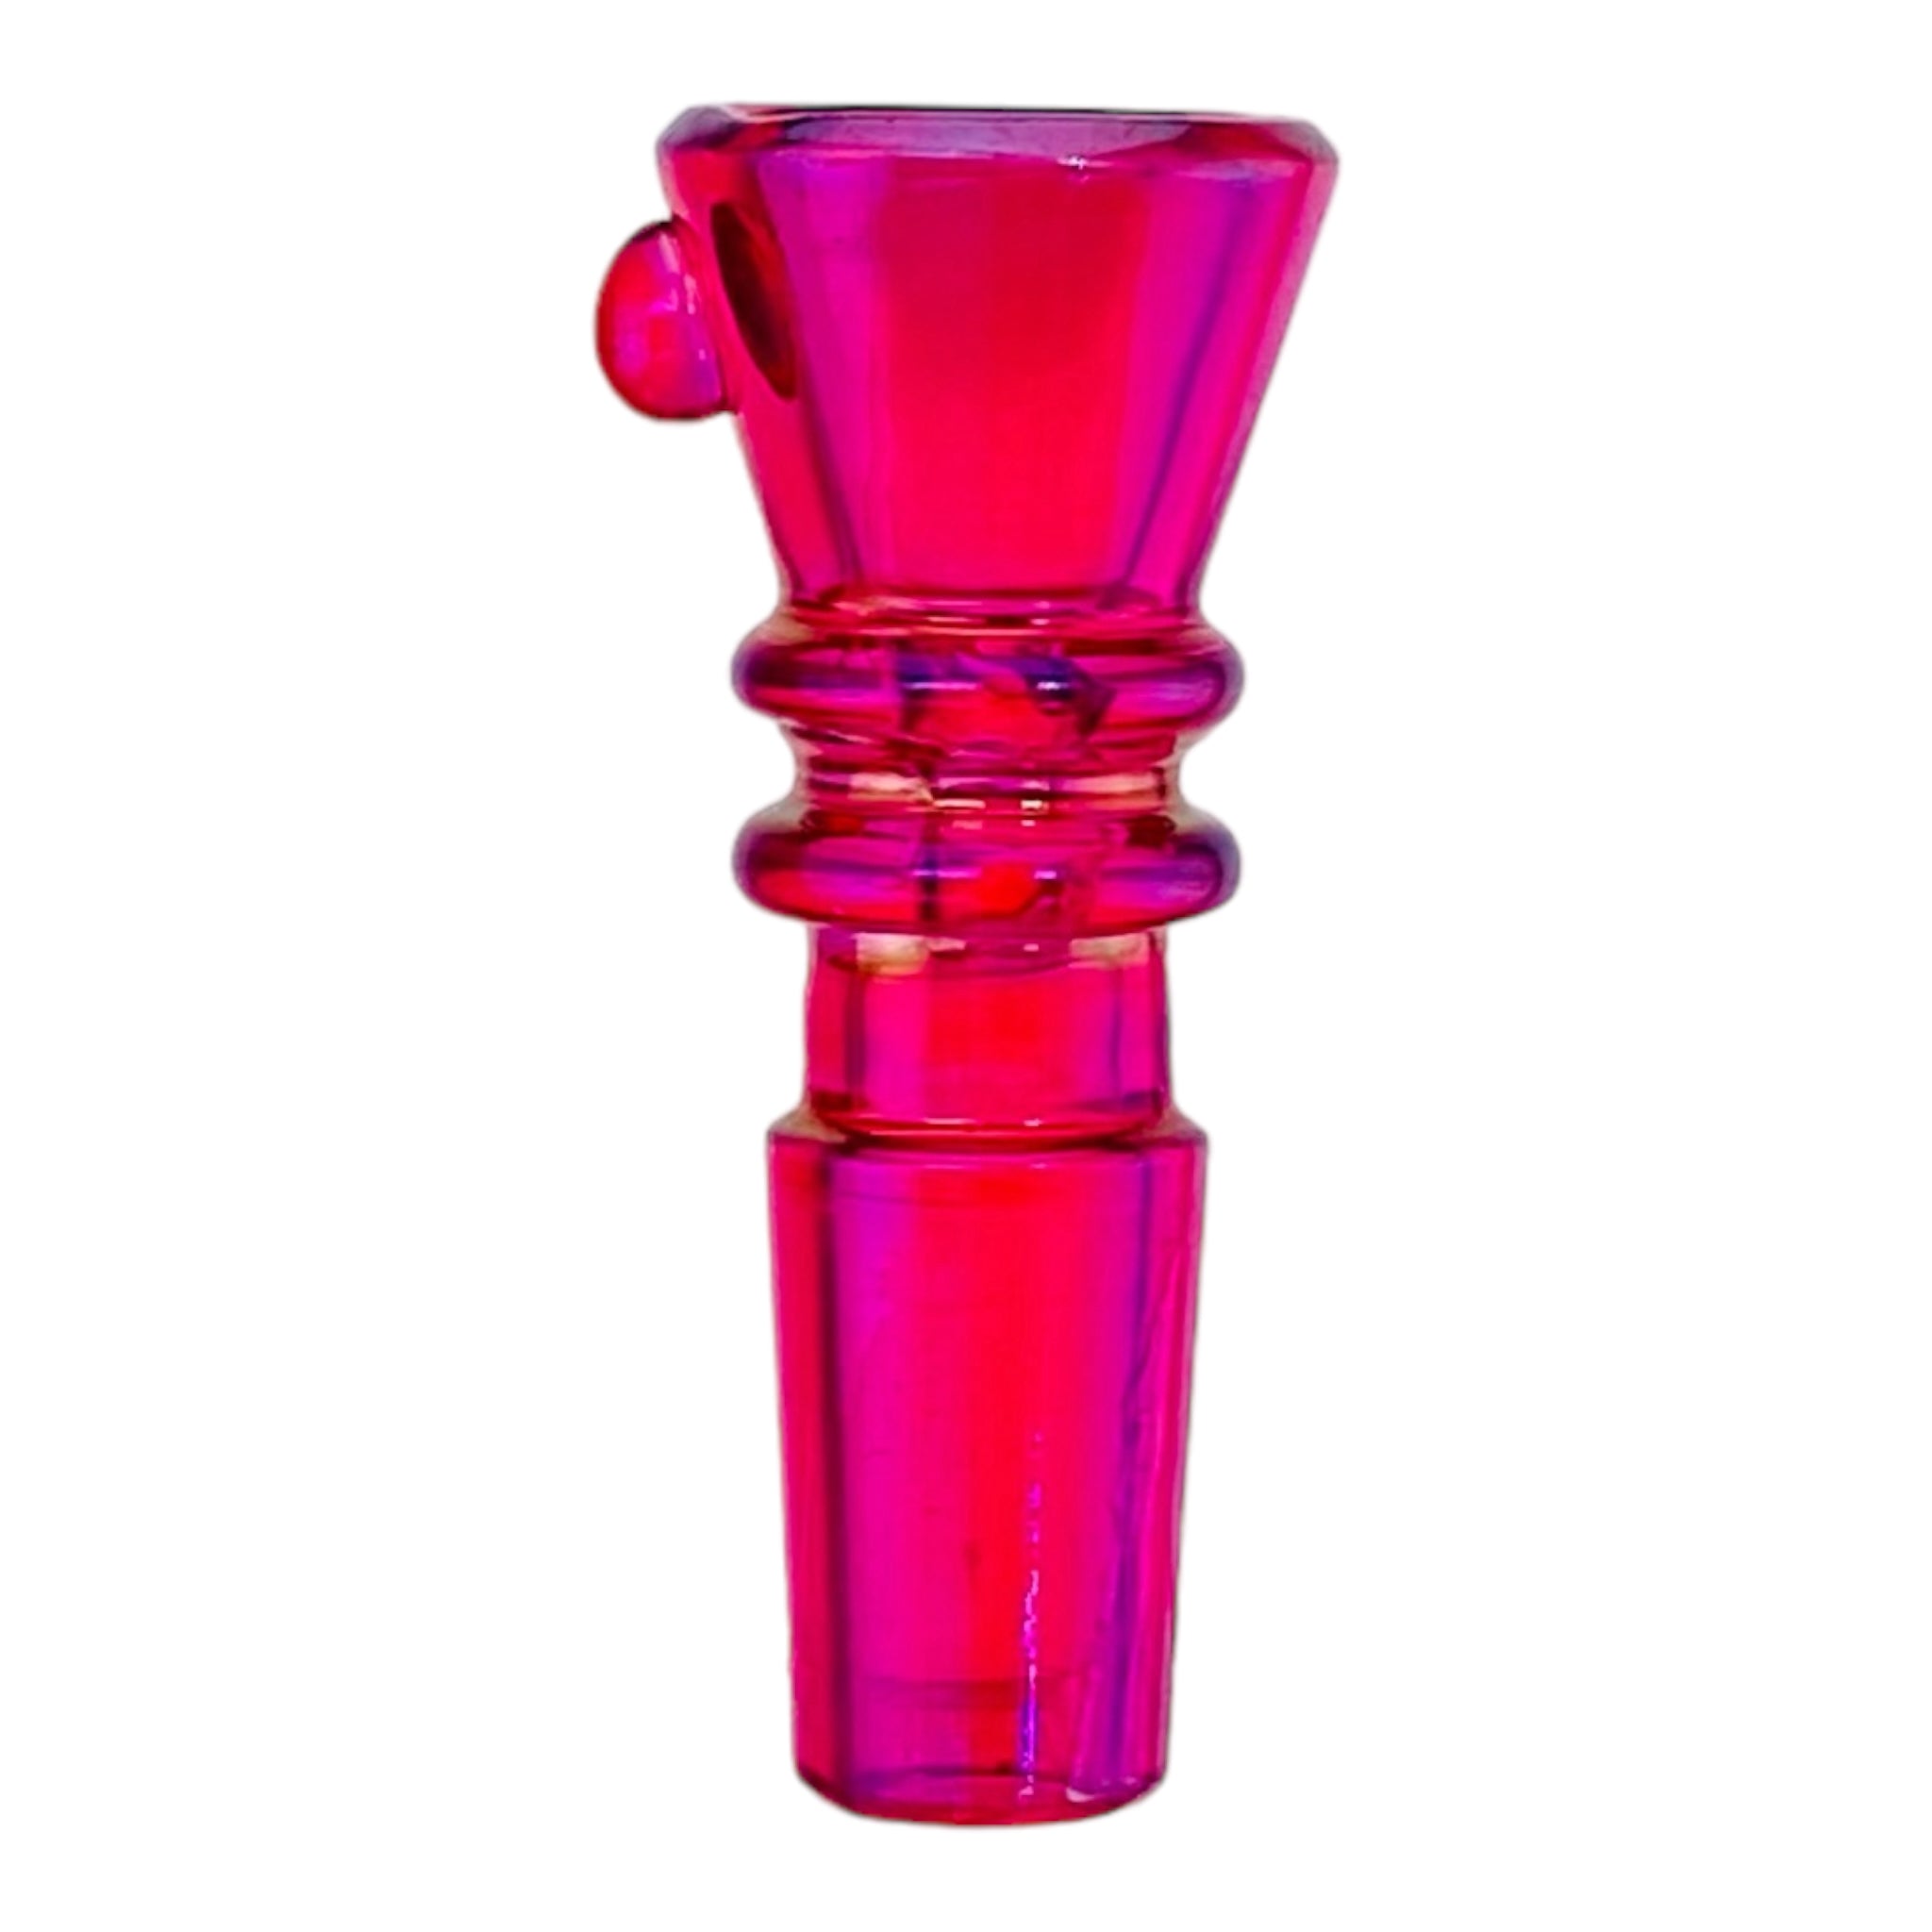 14mm Flower Bowl - Martini Funnel Bong Bowl Piece - Pearlescent Pink